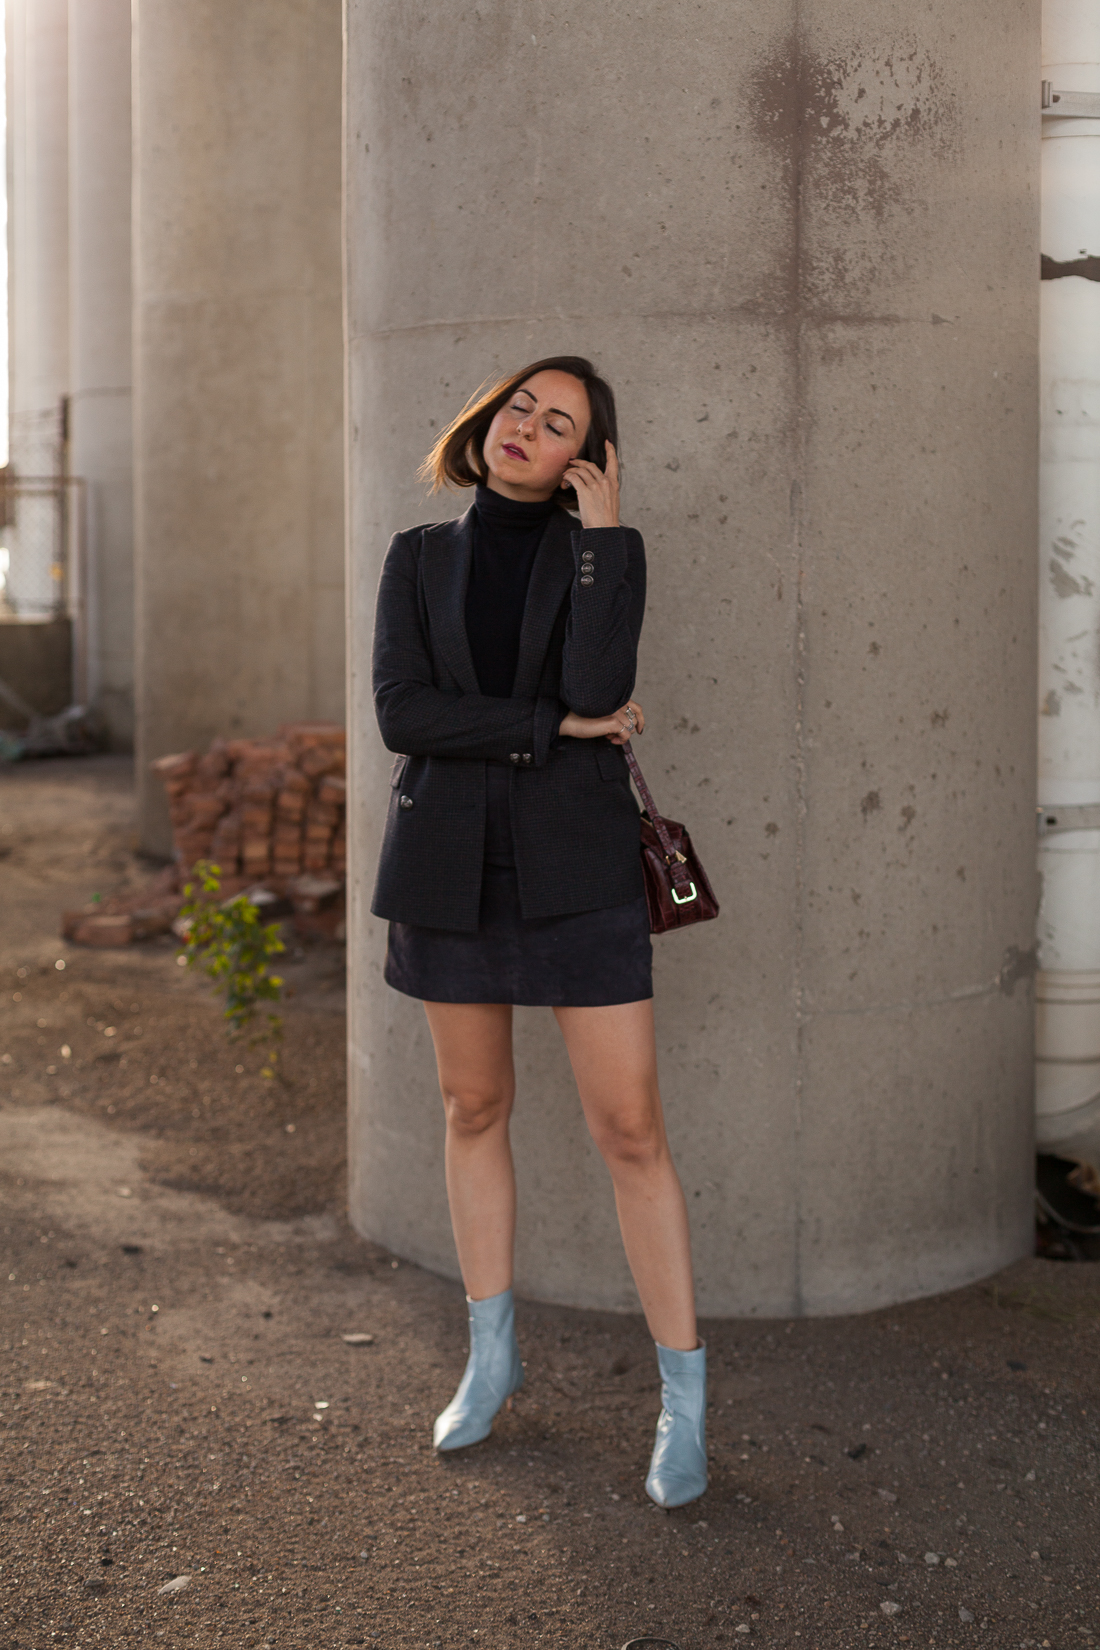 Yana Frigelis of NoMad Luxuries wearing a monochrome look in navy from theory and zara for Fall fashion